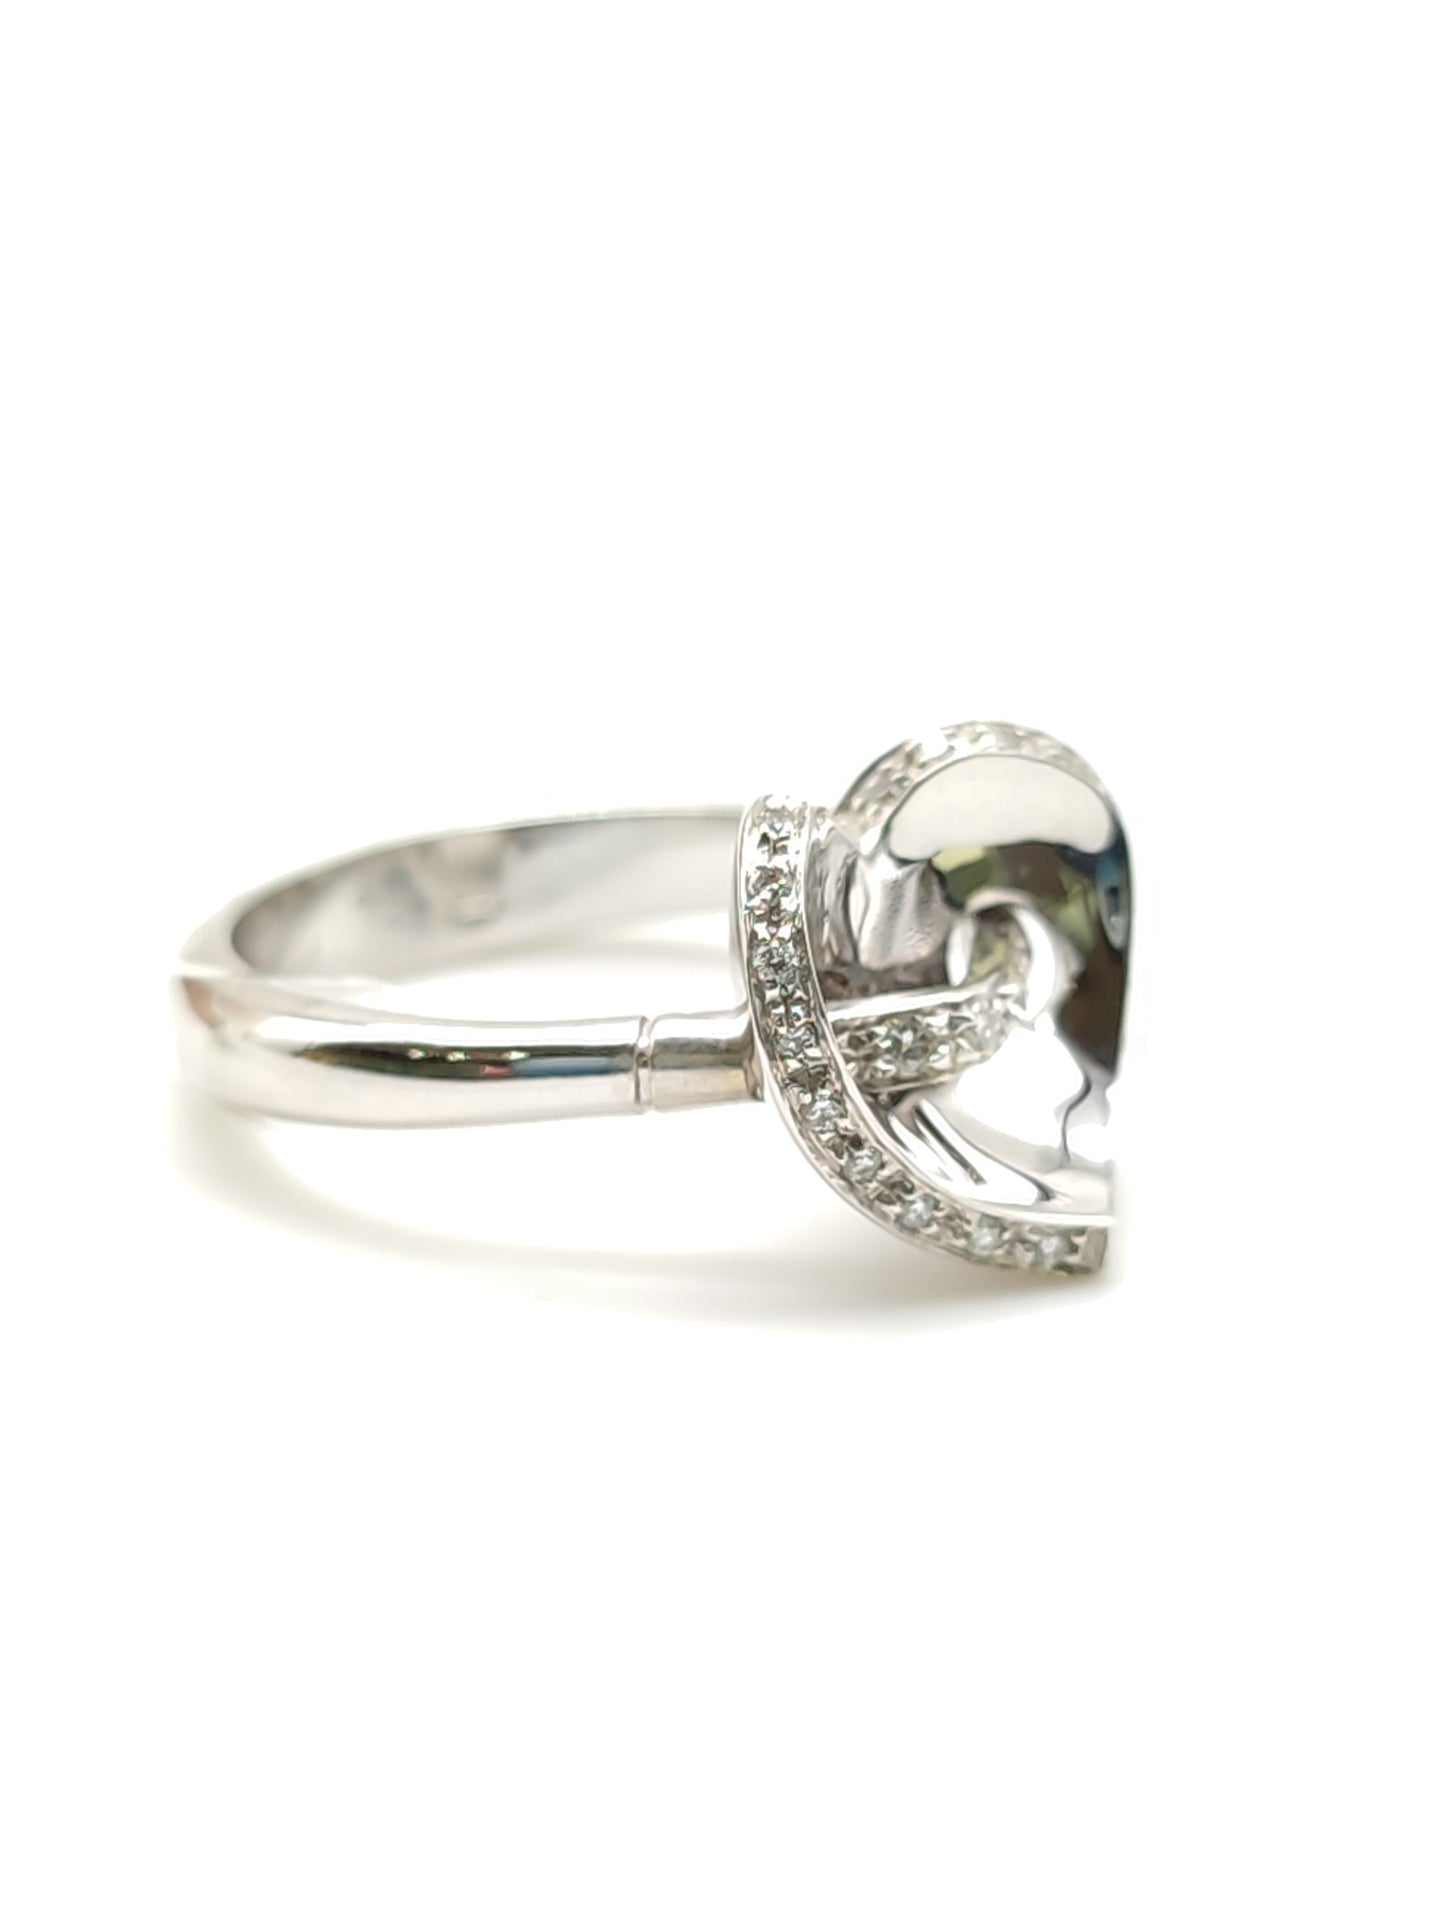 Heart-shaped white gold ring with 0.16ct diamonds